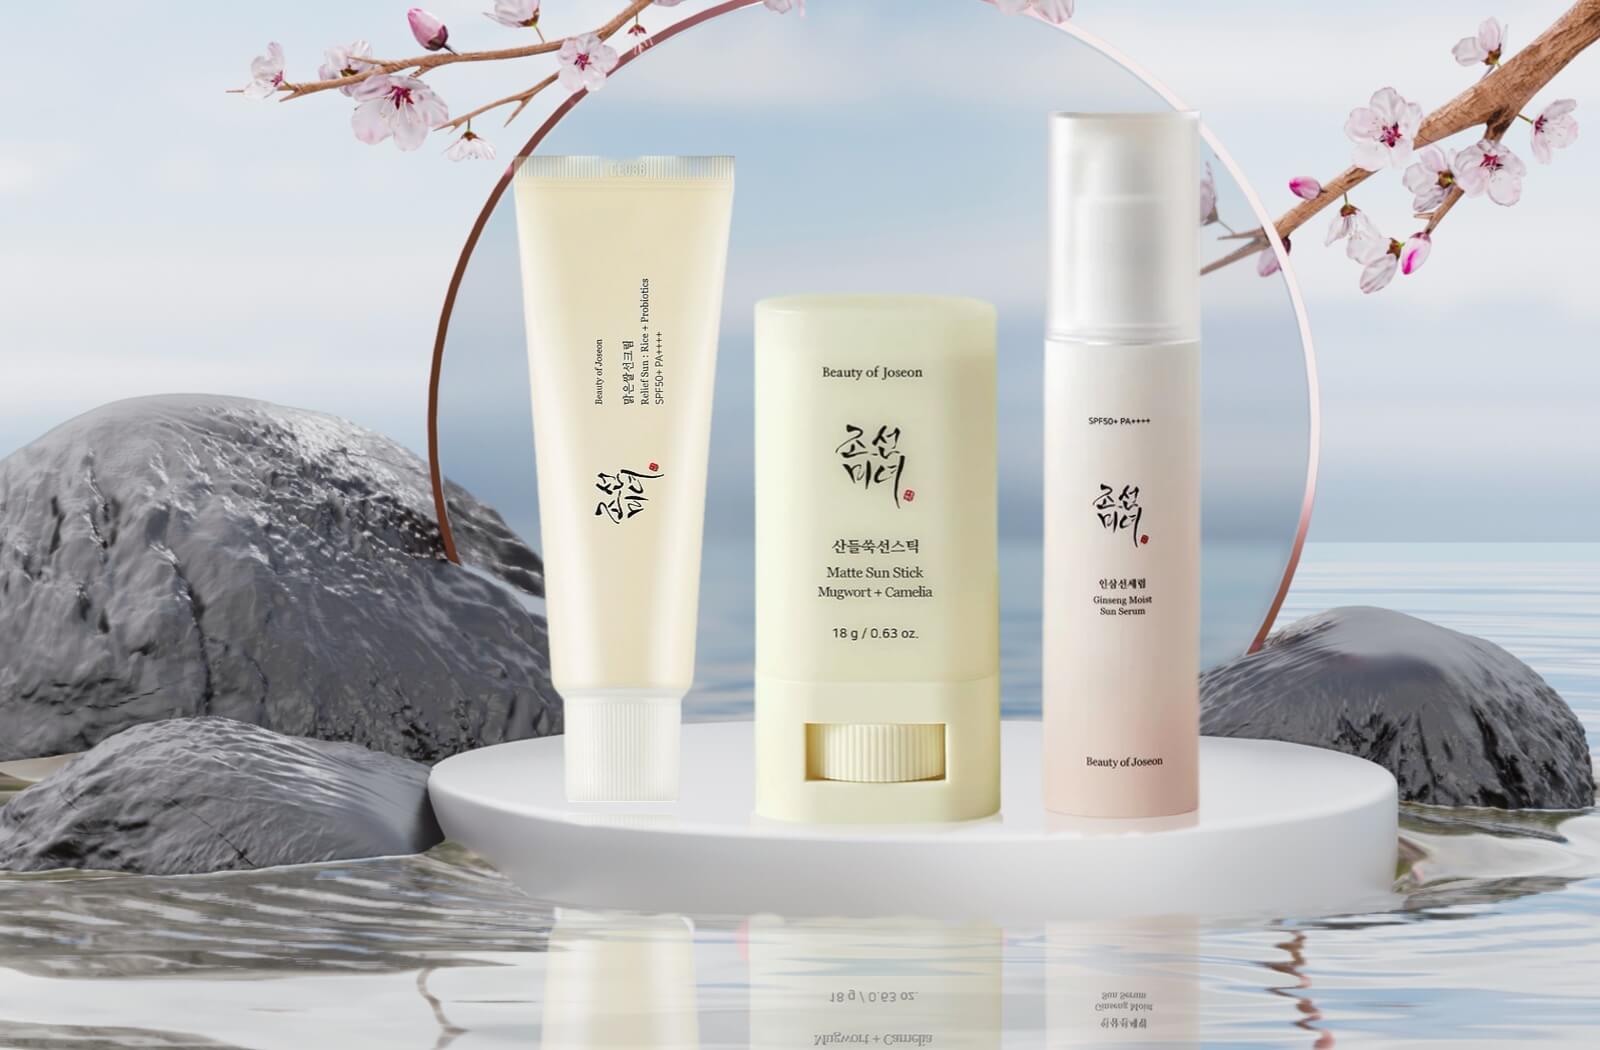 3 beauty of joseon sunscreens floating on water - links to beauty of joseon sun serum and link to their collection